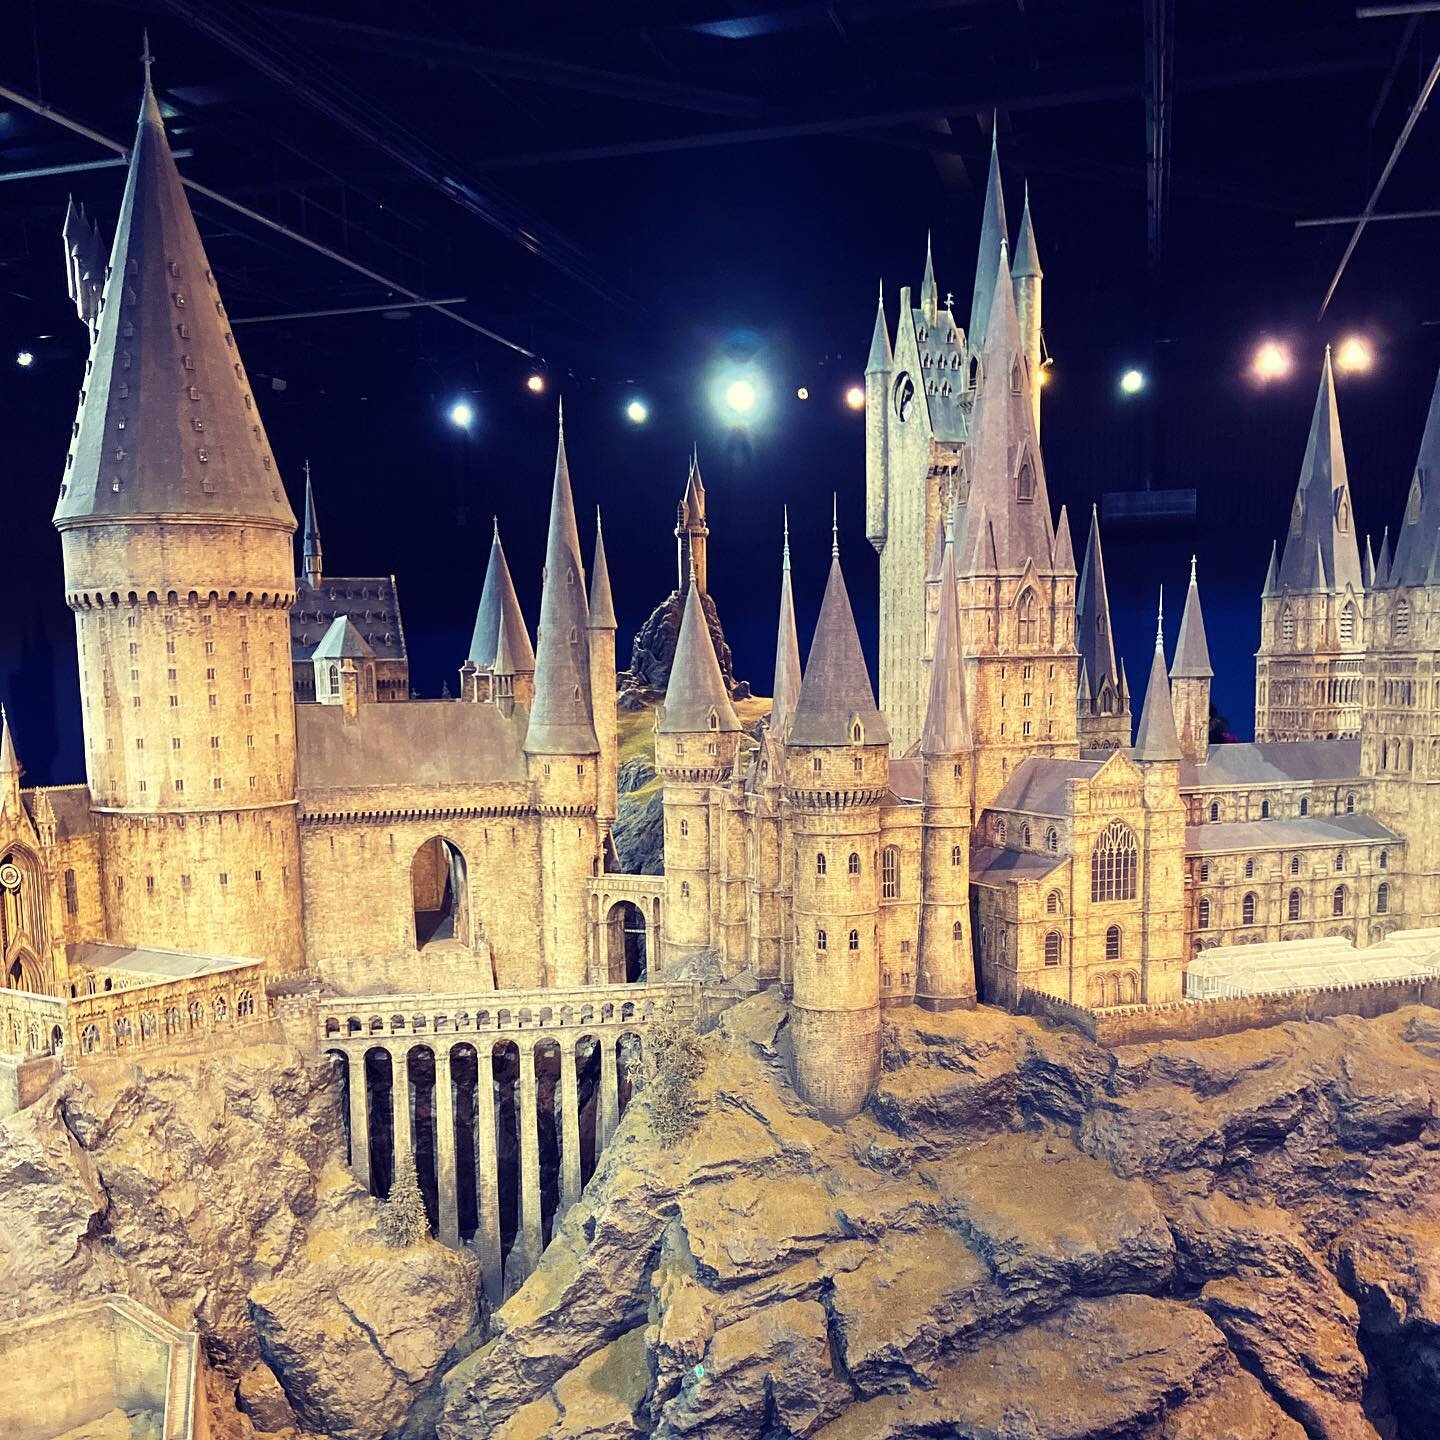 Harry Potter Studio, February 2023

Now it&rsquo;s time for a magic castle!

What a day seeing so many incredible sets created for all the Harry Potter Films. This collection barely scratches the surface, but I only get 10 photos on instagram 🙄
It t